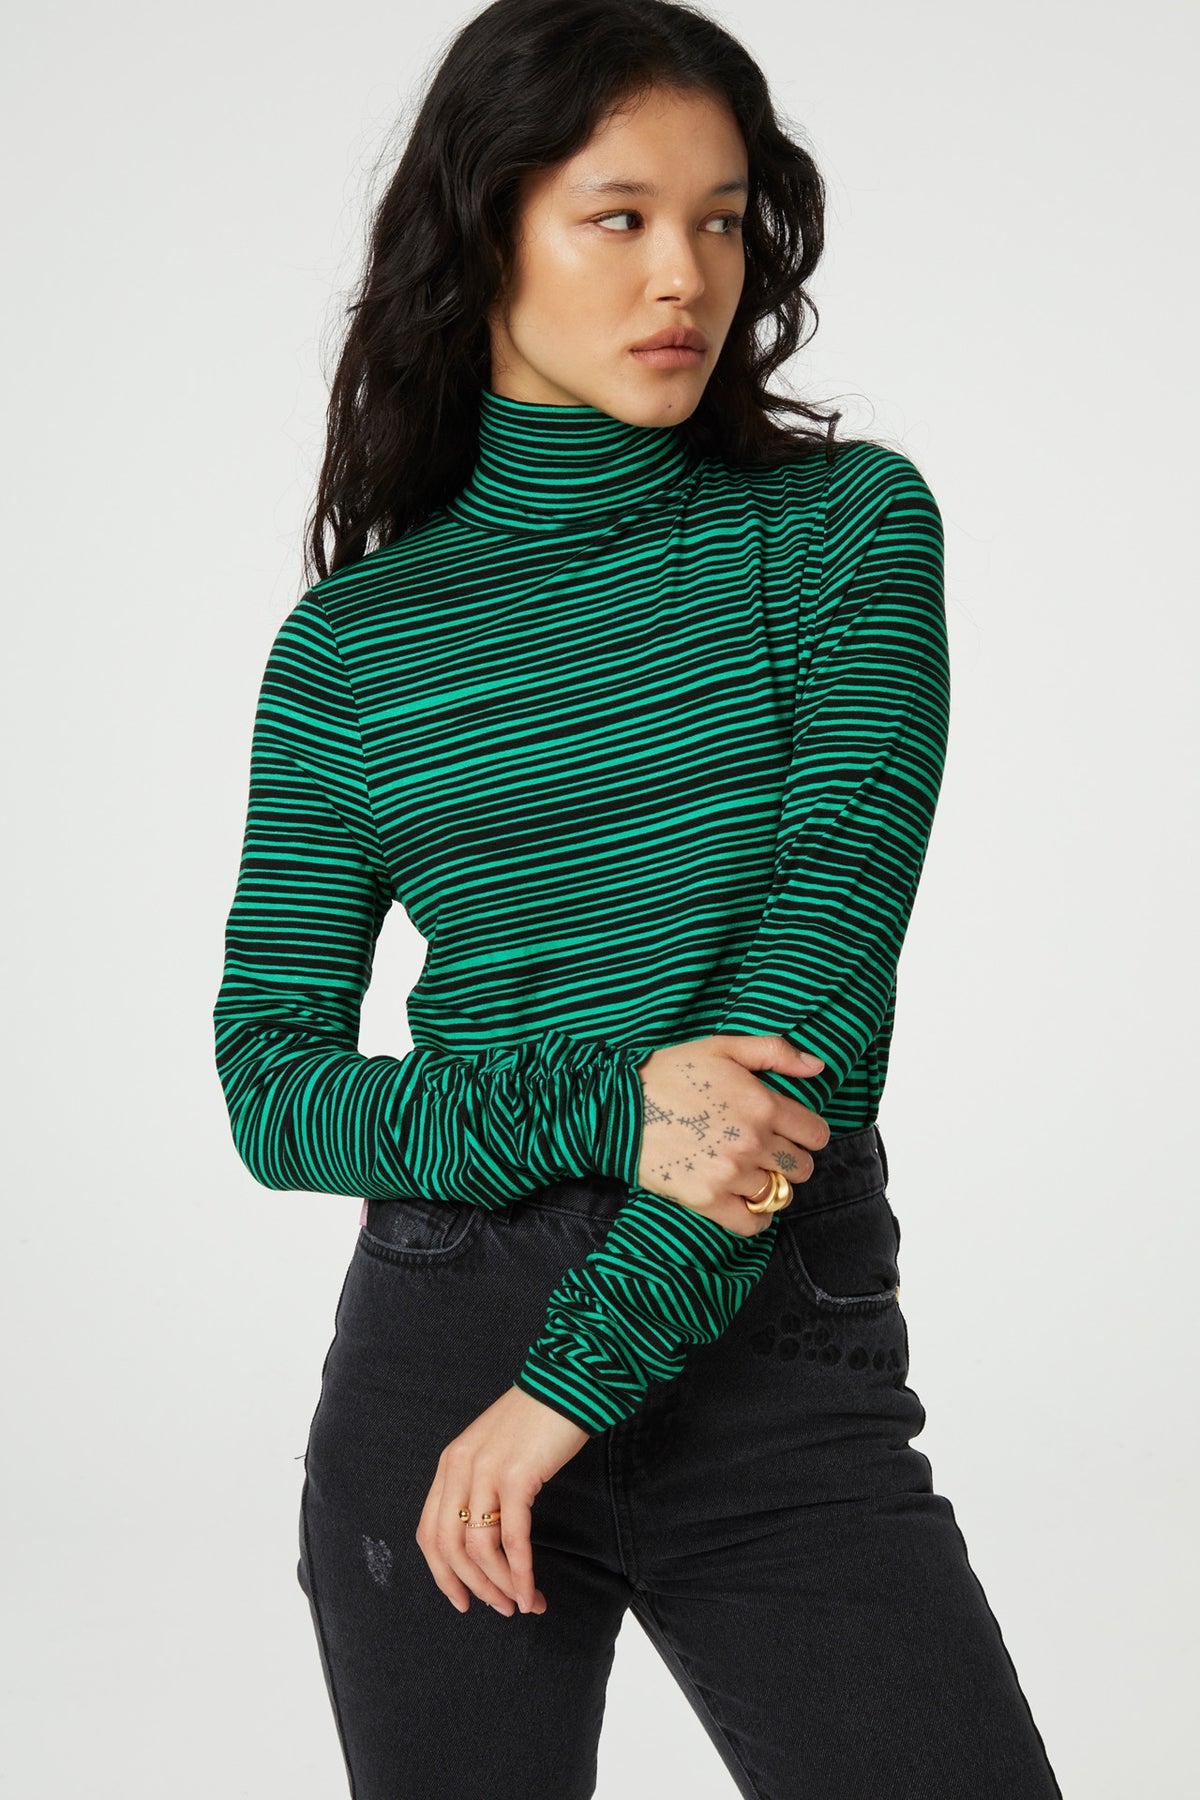 Black and green striped jersey roll neck with long sleeves